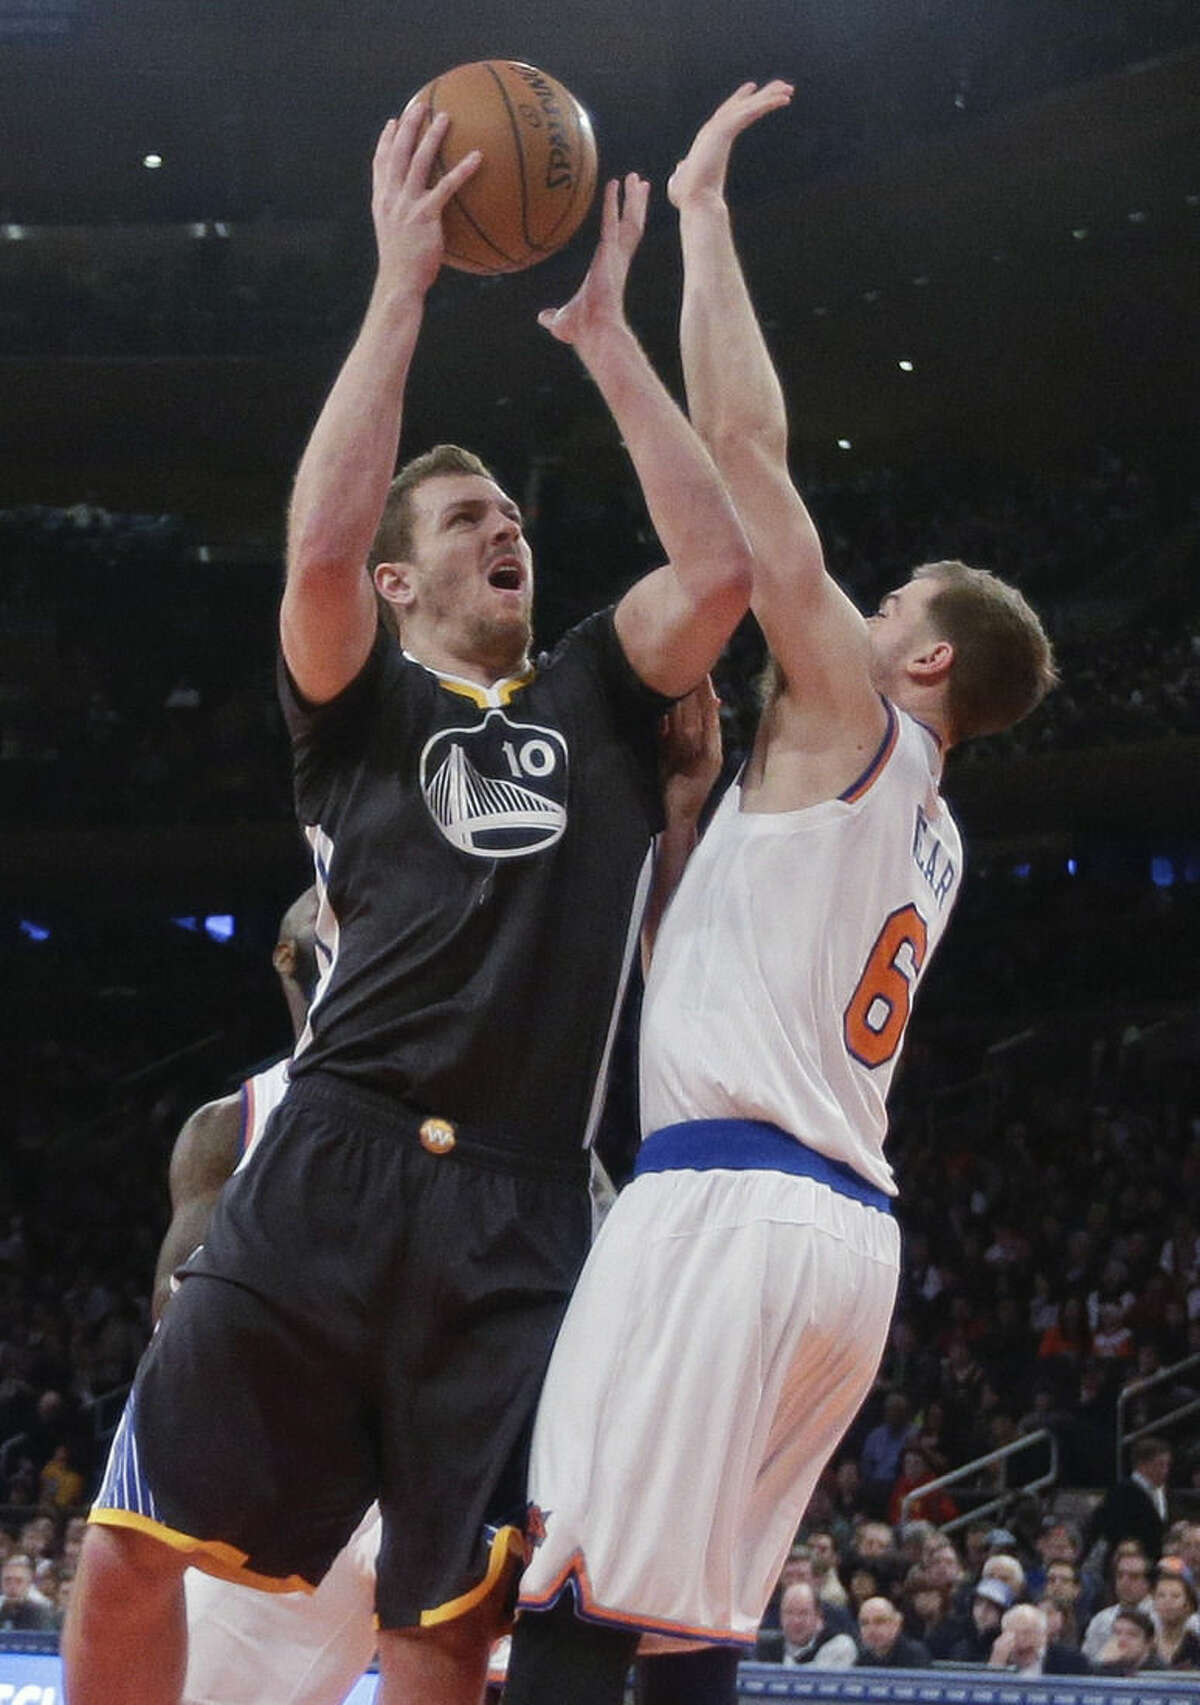 Golden State Warriors' David Lee (10) shoots over New York Knicks' Travis Wear (6) during the first half of an NBA basketball game Saturday, Feb. 7, 2015, in New York. (AP Photo/Frank Franklin II)